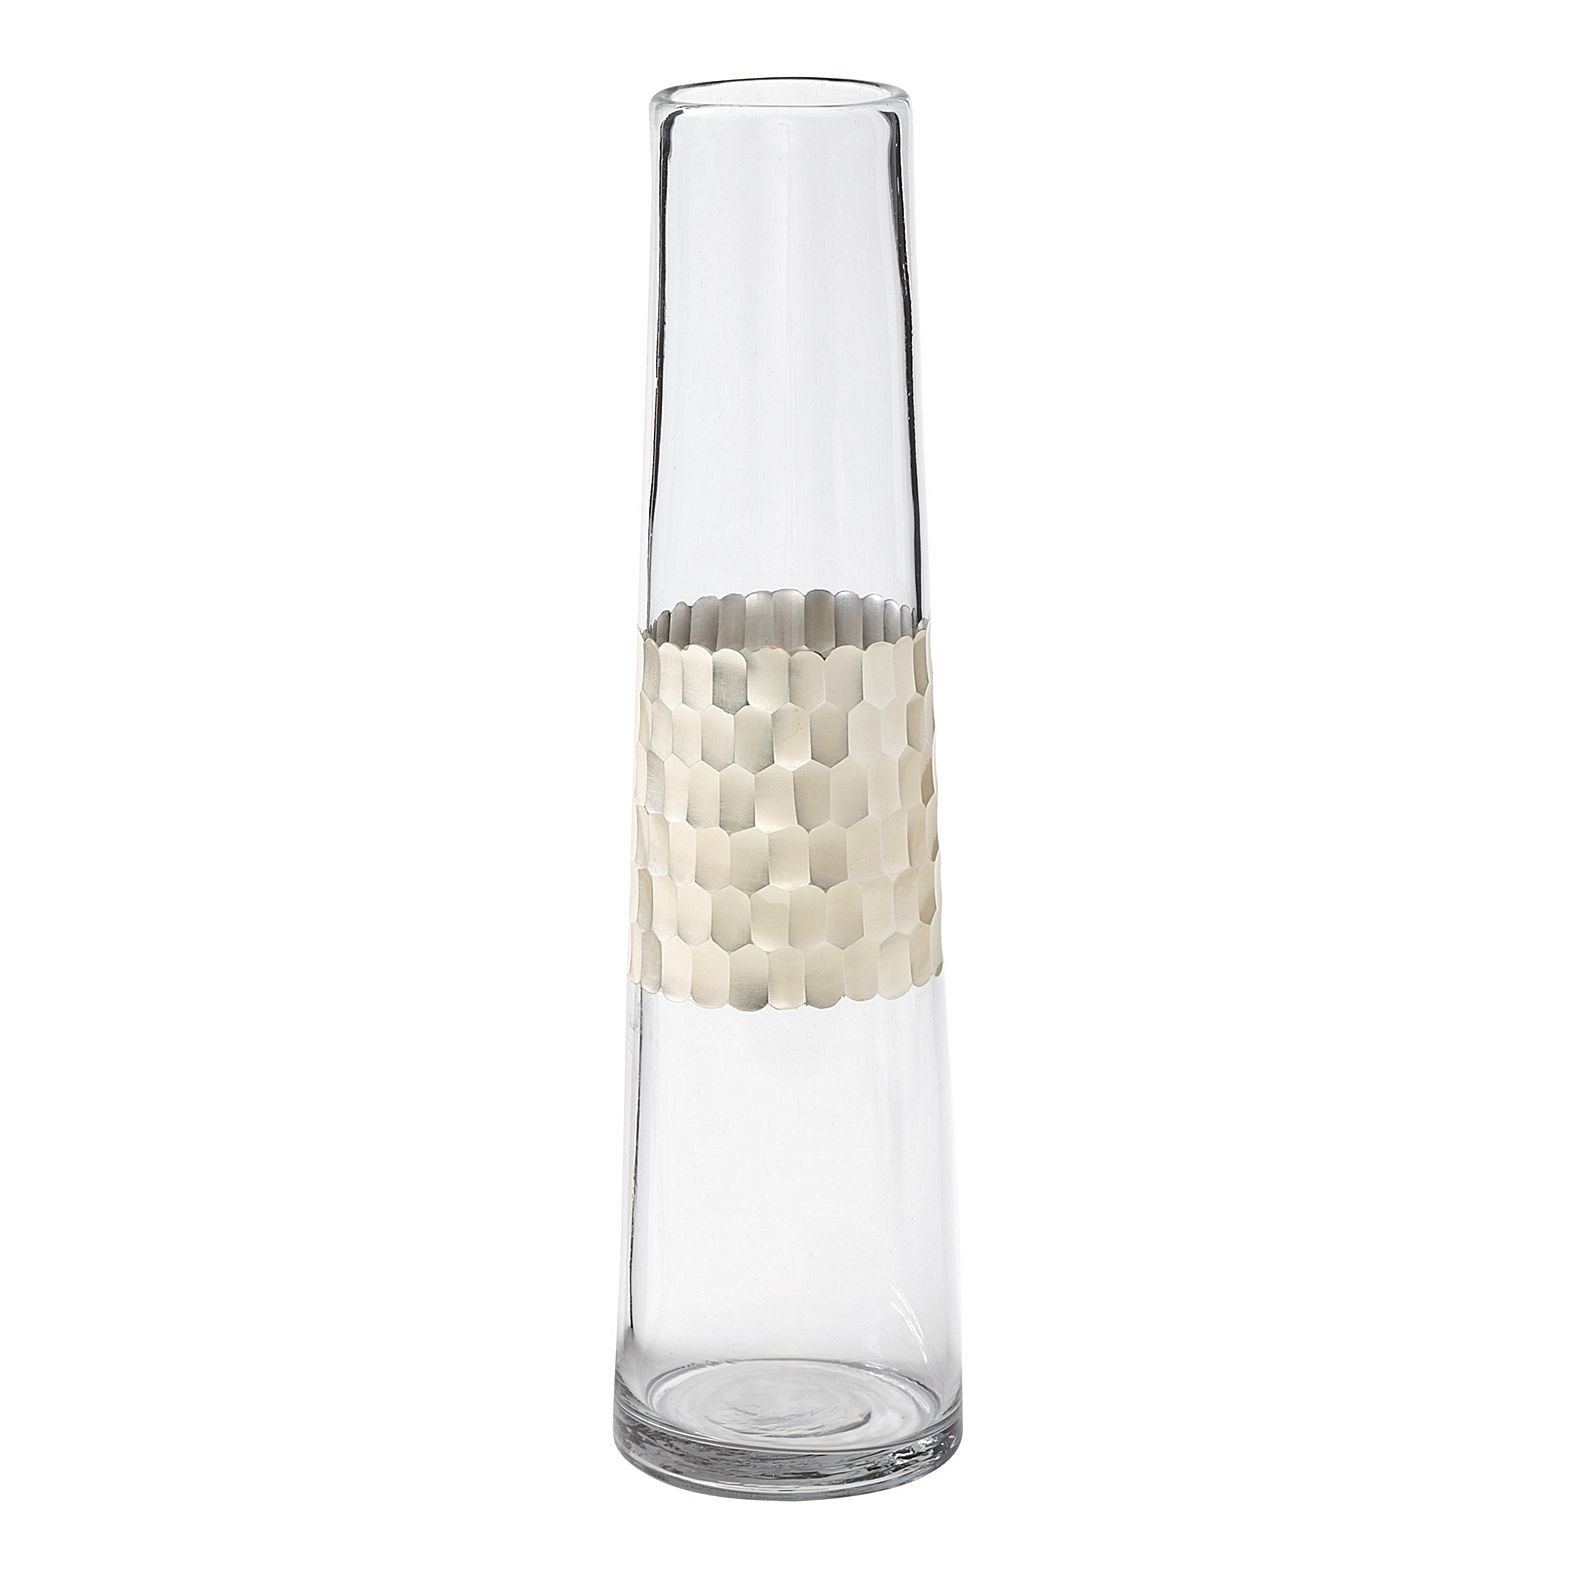 16 attractive 16 Inch Glass Vase 2024 free download 16 inch glass vase of plated glass vase silver 16 serena lily new house pertaining to plated glass vase silver 16 serena lily